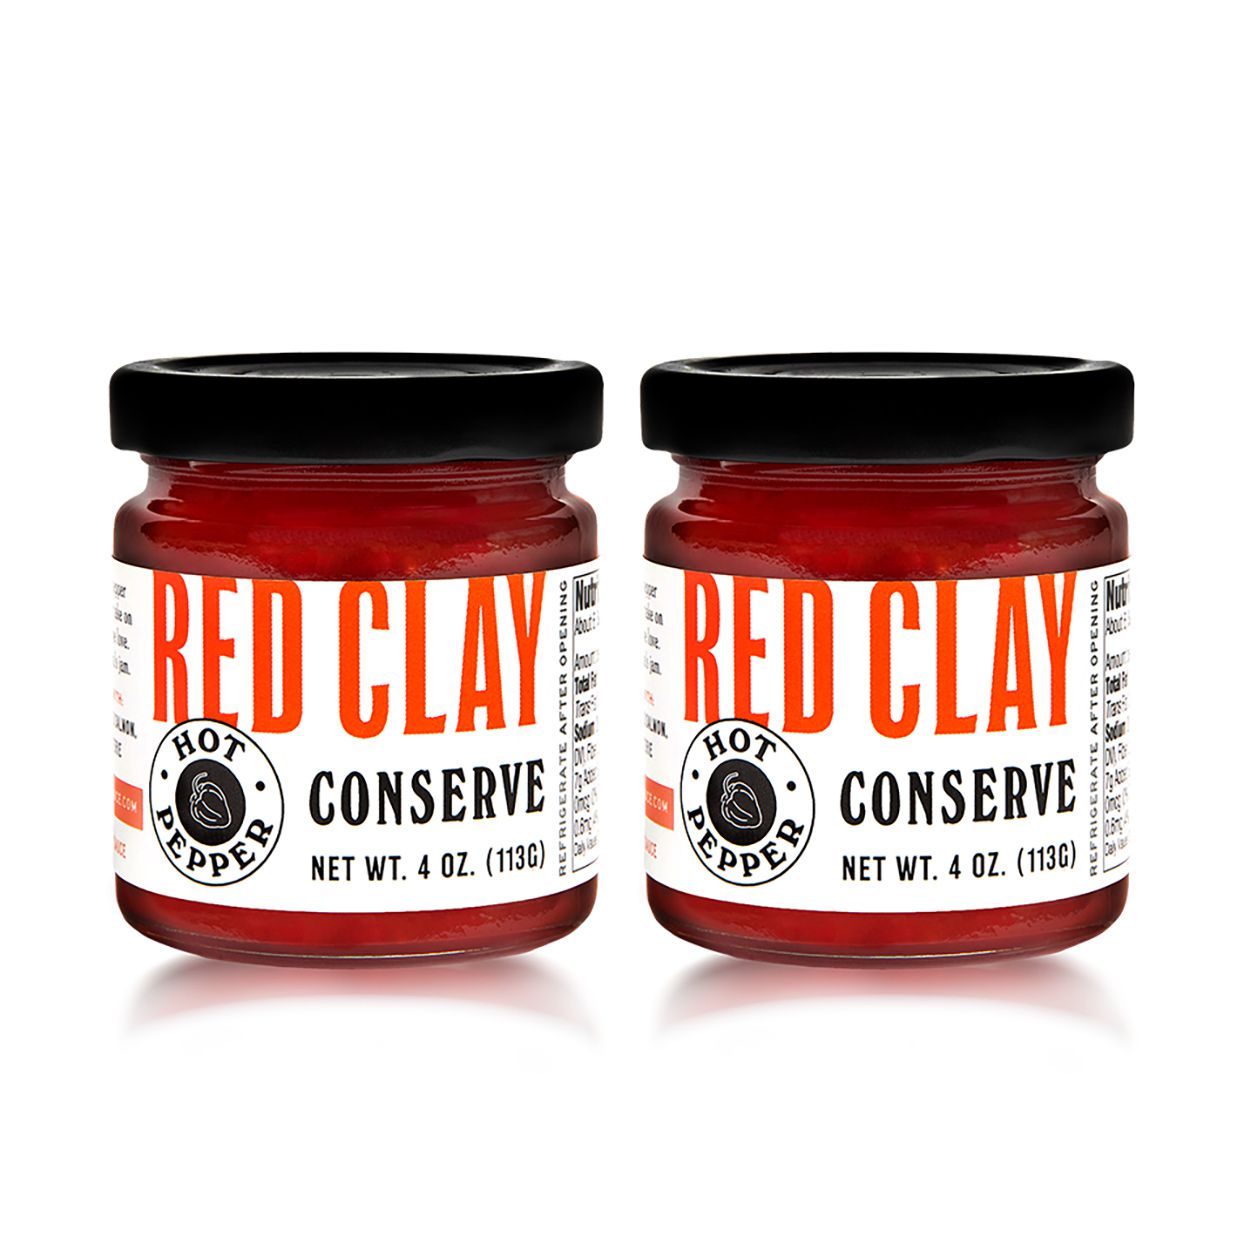 Red Clay Hot Pepper Conserve